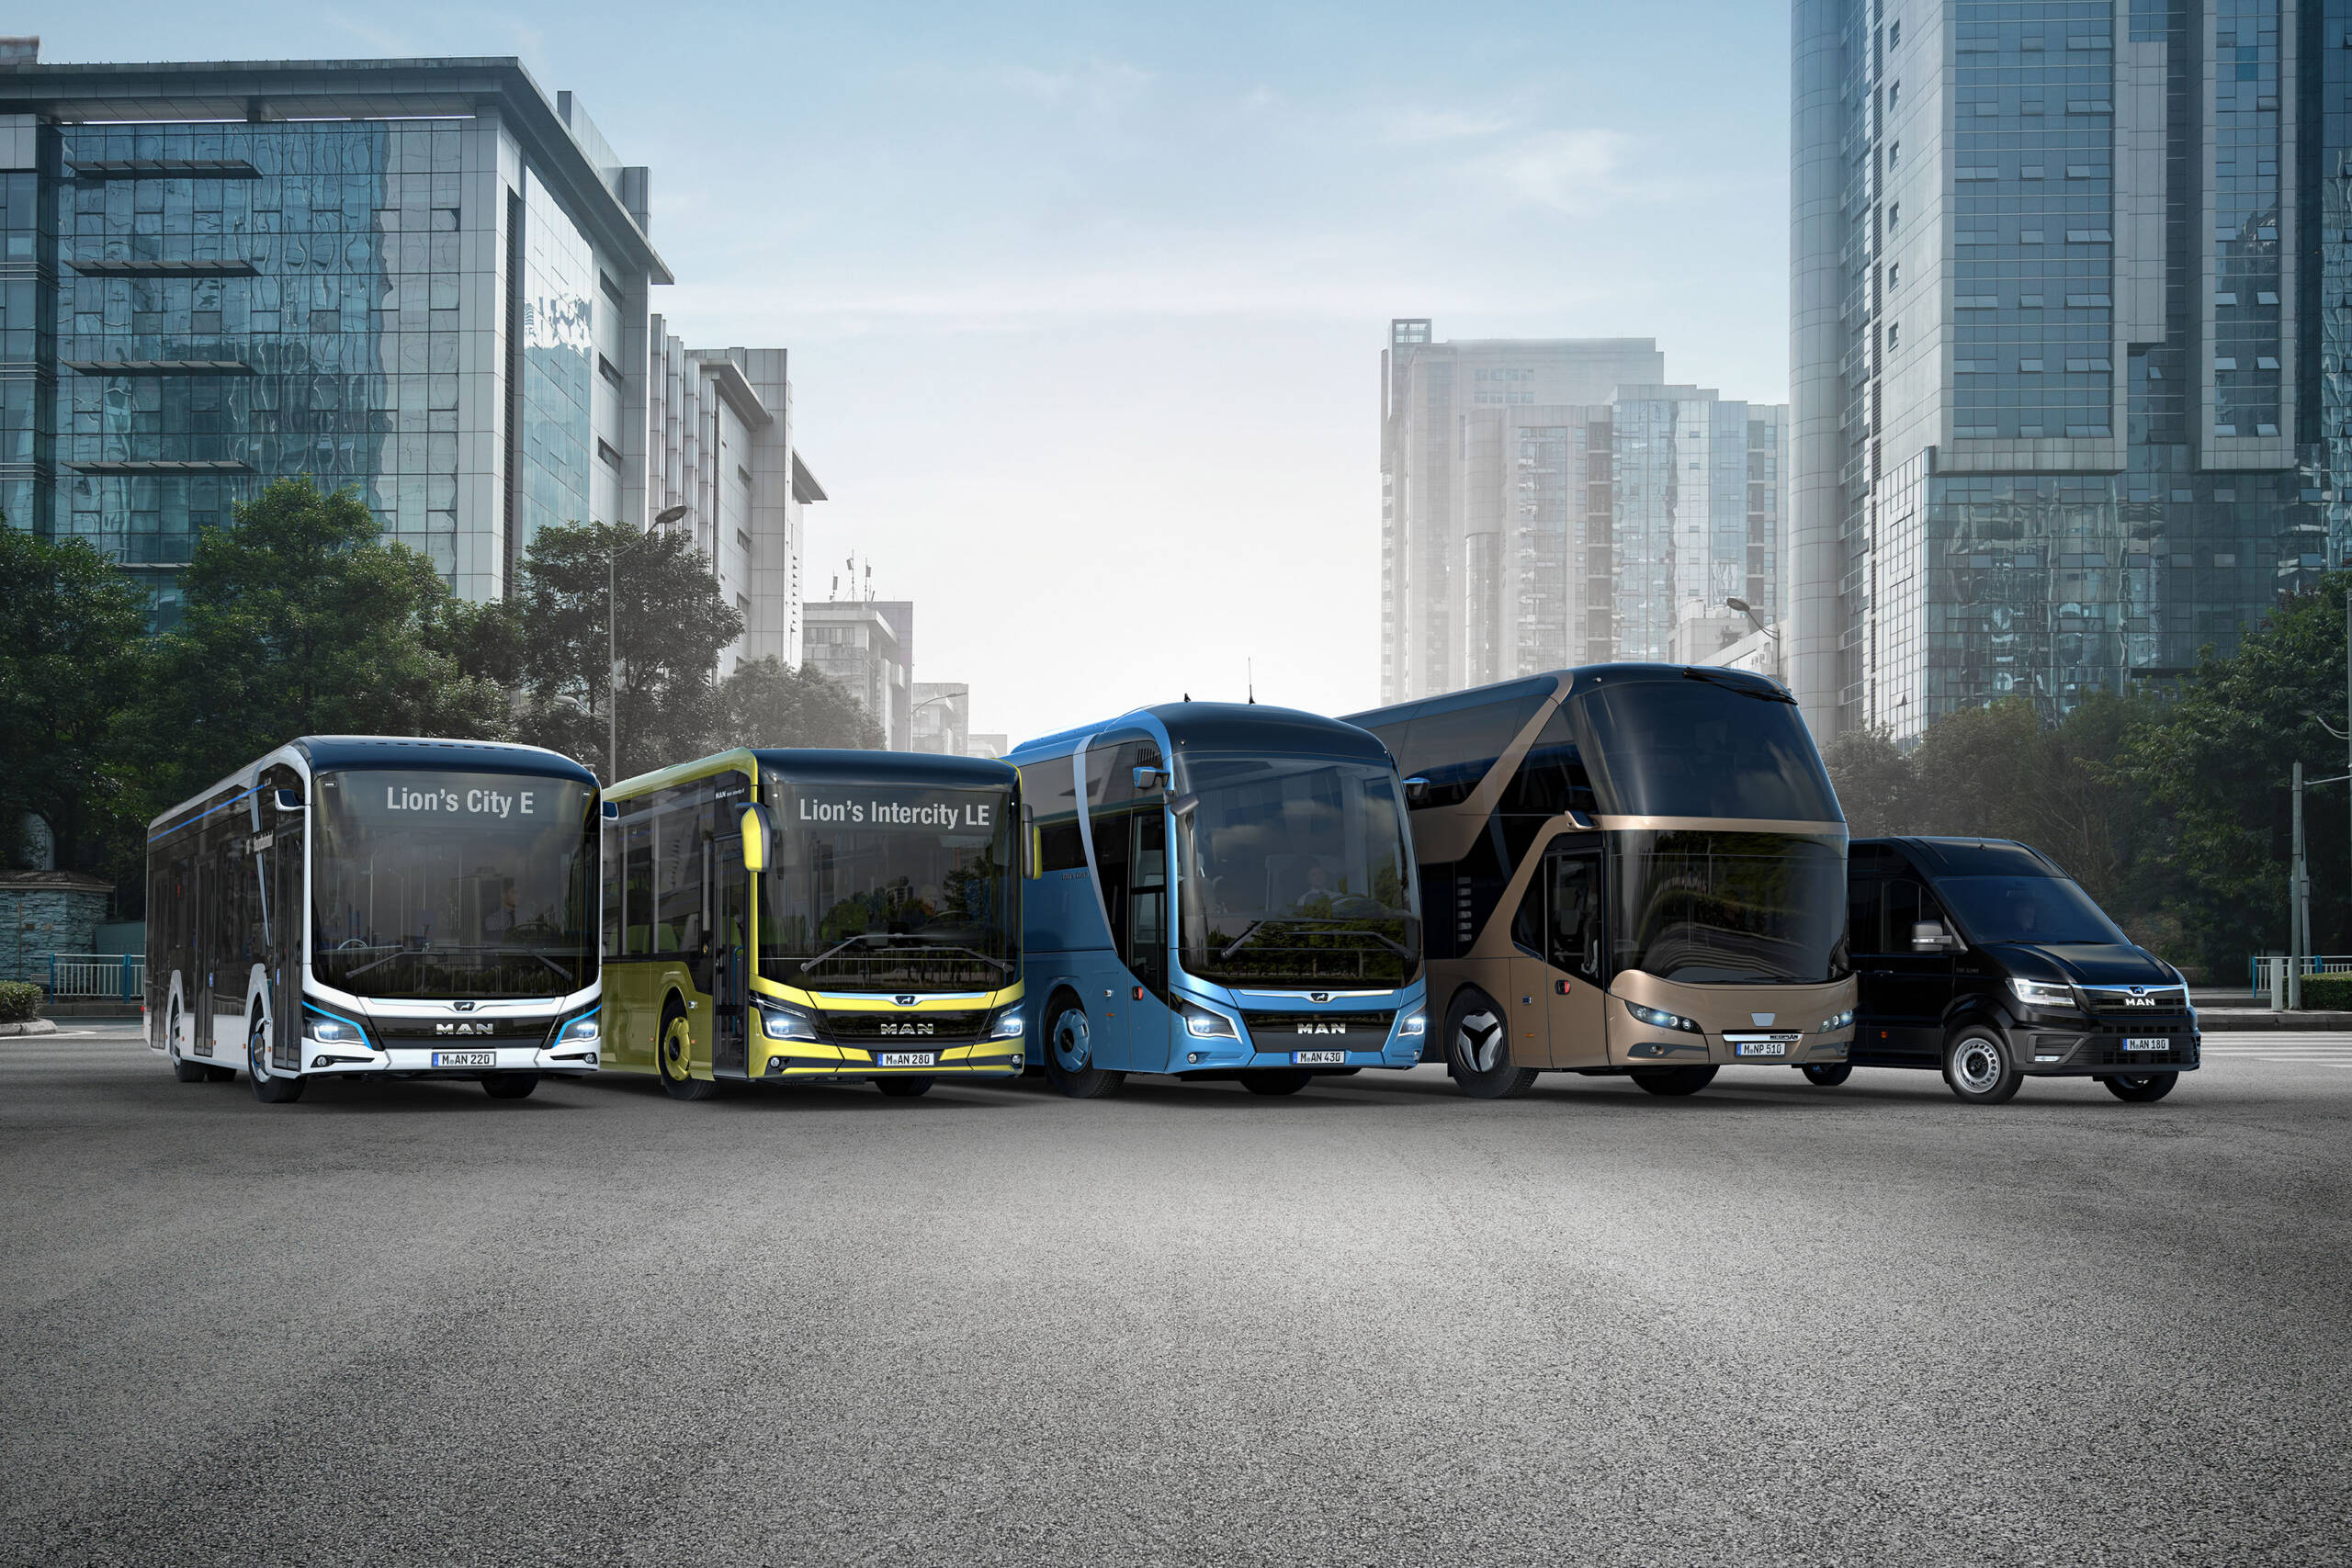 Head of Bus Solutions’